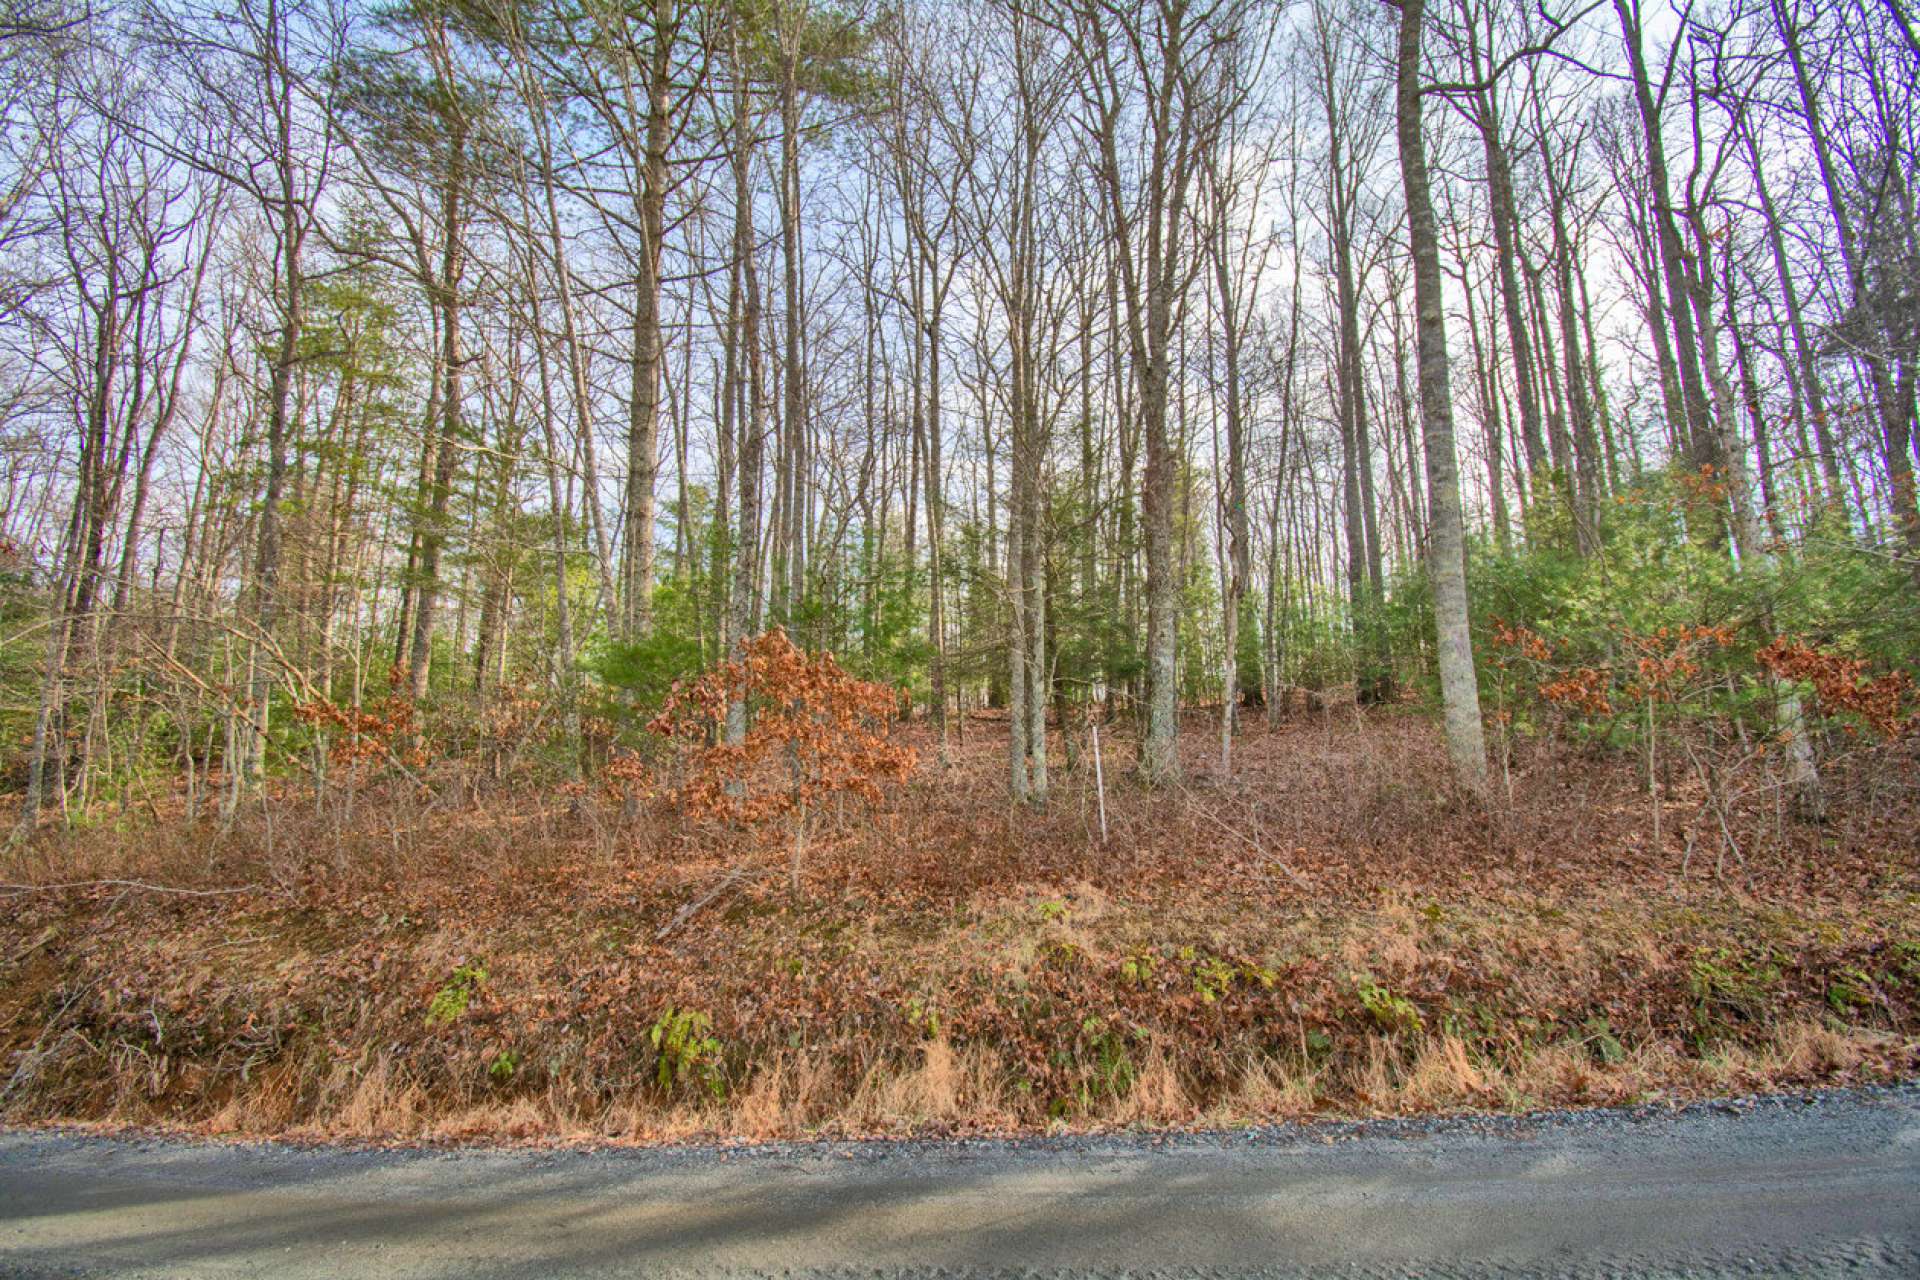 Lots 10,12,13, 18, and 19  CB Trail are all offered together for $50,000. These lots total 6.37 acres for a beautiful estate-sized homesite.